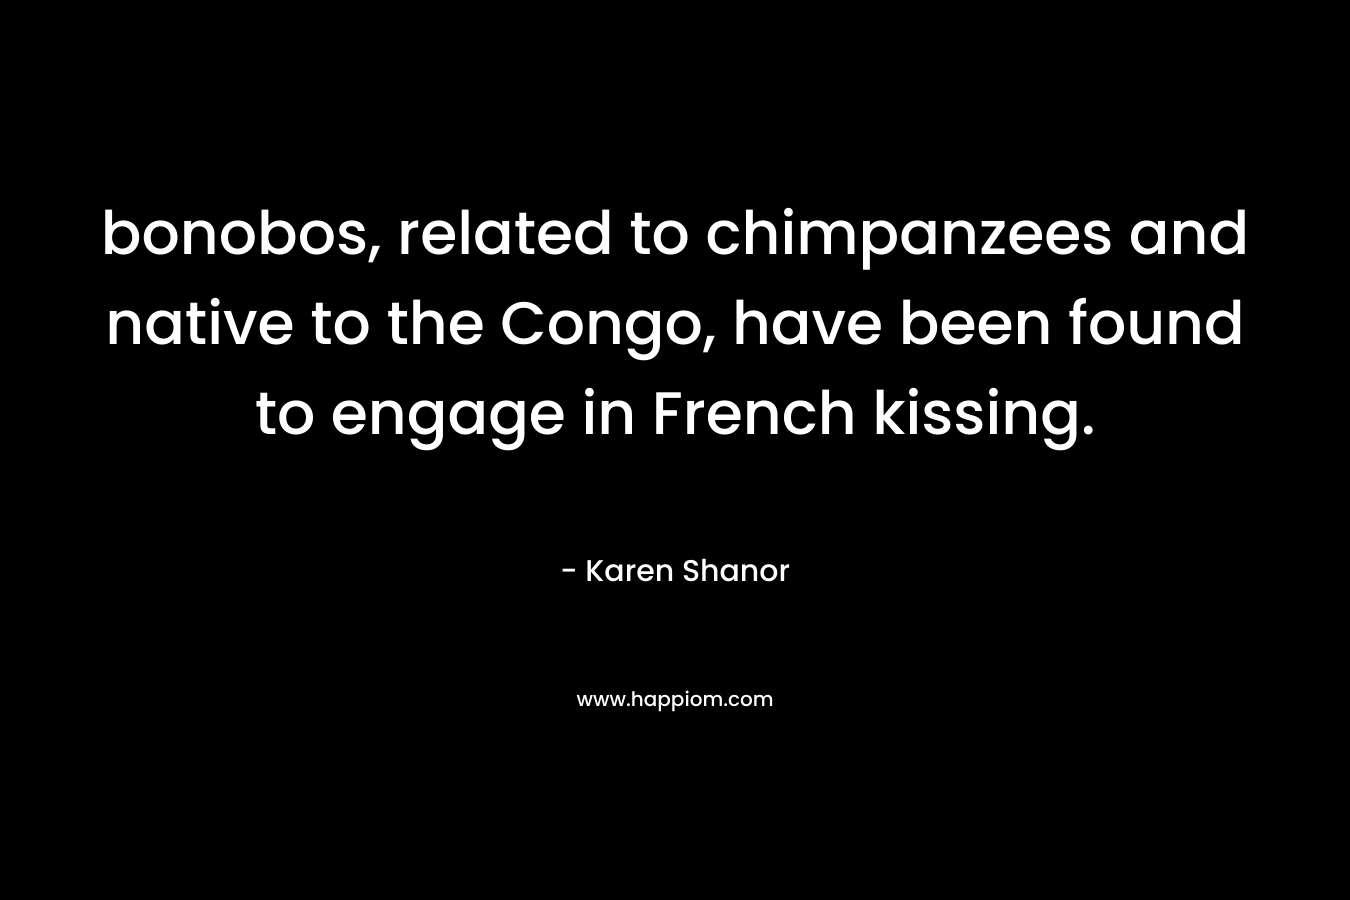 bonobos, related to chimpanzees and native to the Congo, have been found to engage in French kissing. – Karen Shanor